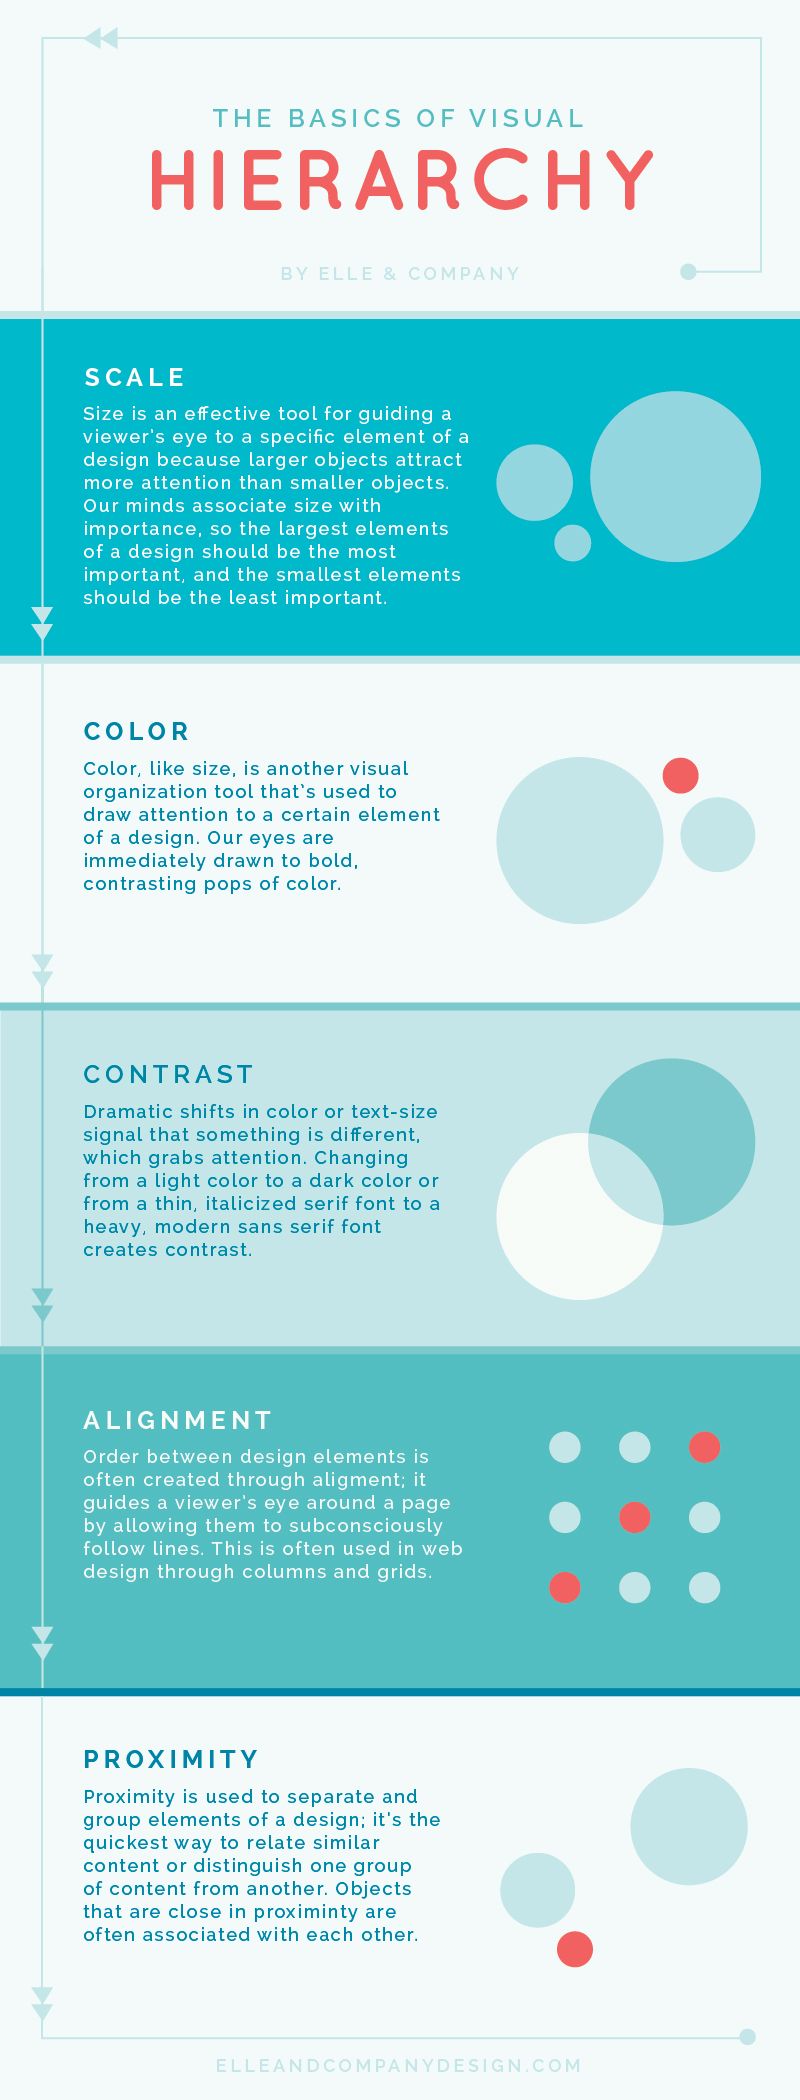 The Basics of Visual Hierarchy (And Why It's Important For Your Website!)